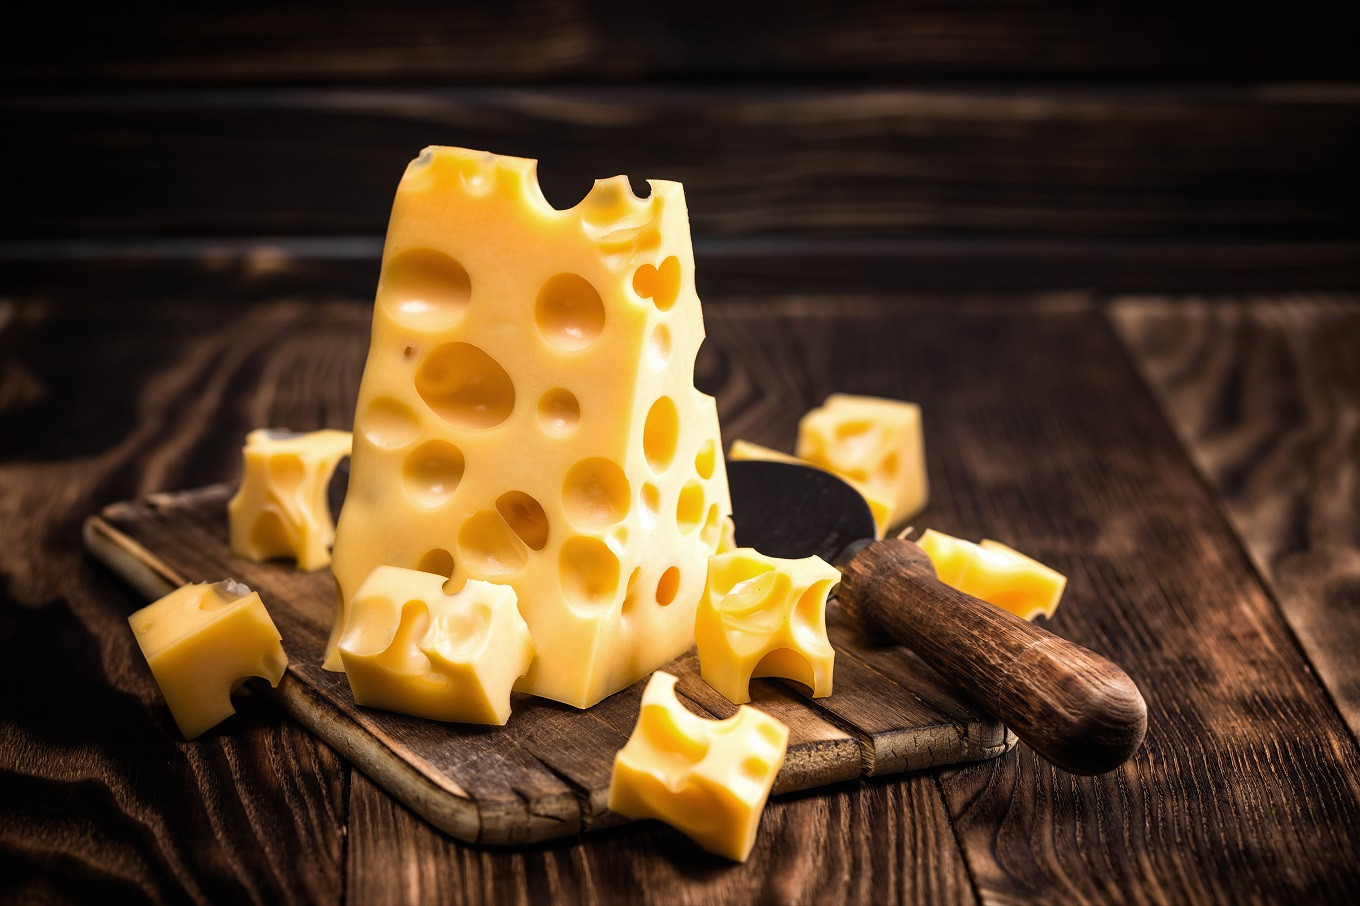 Best-foods-for-probiotics:-Some-types-of-cheese